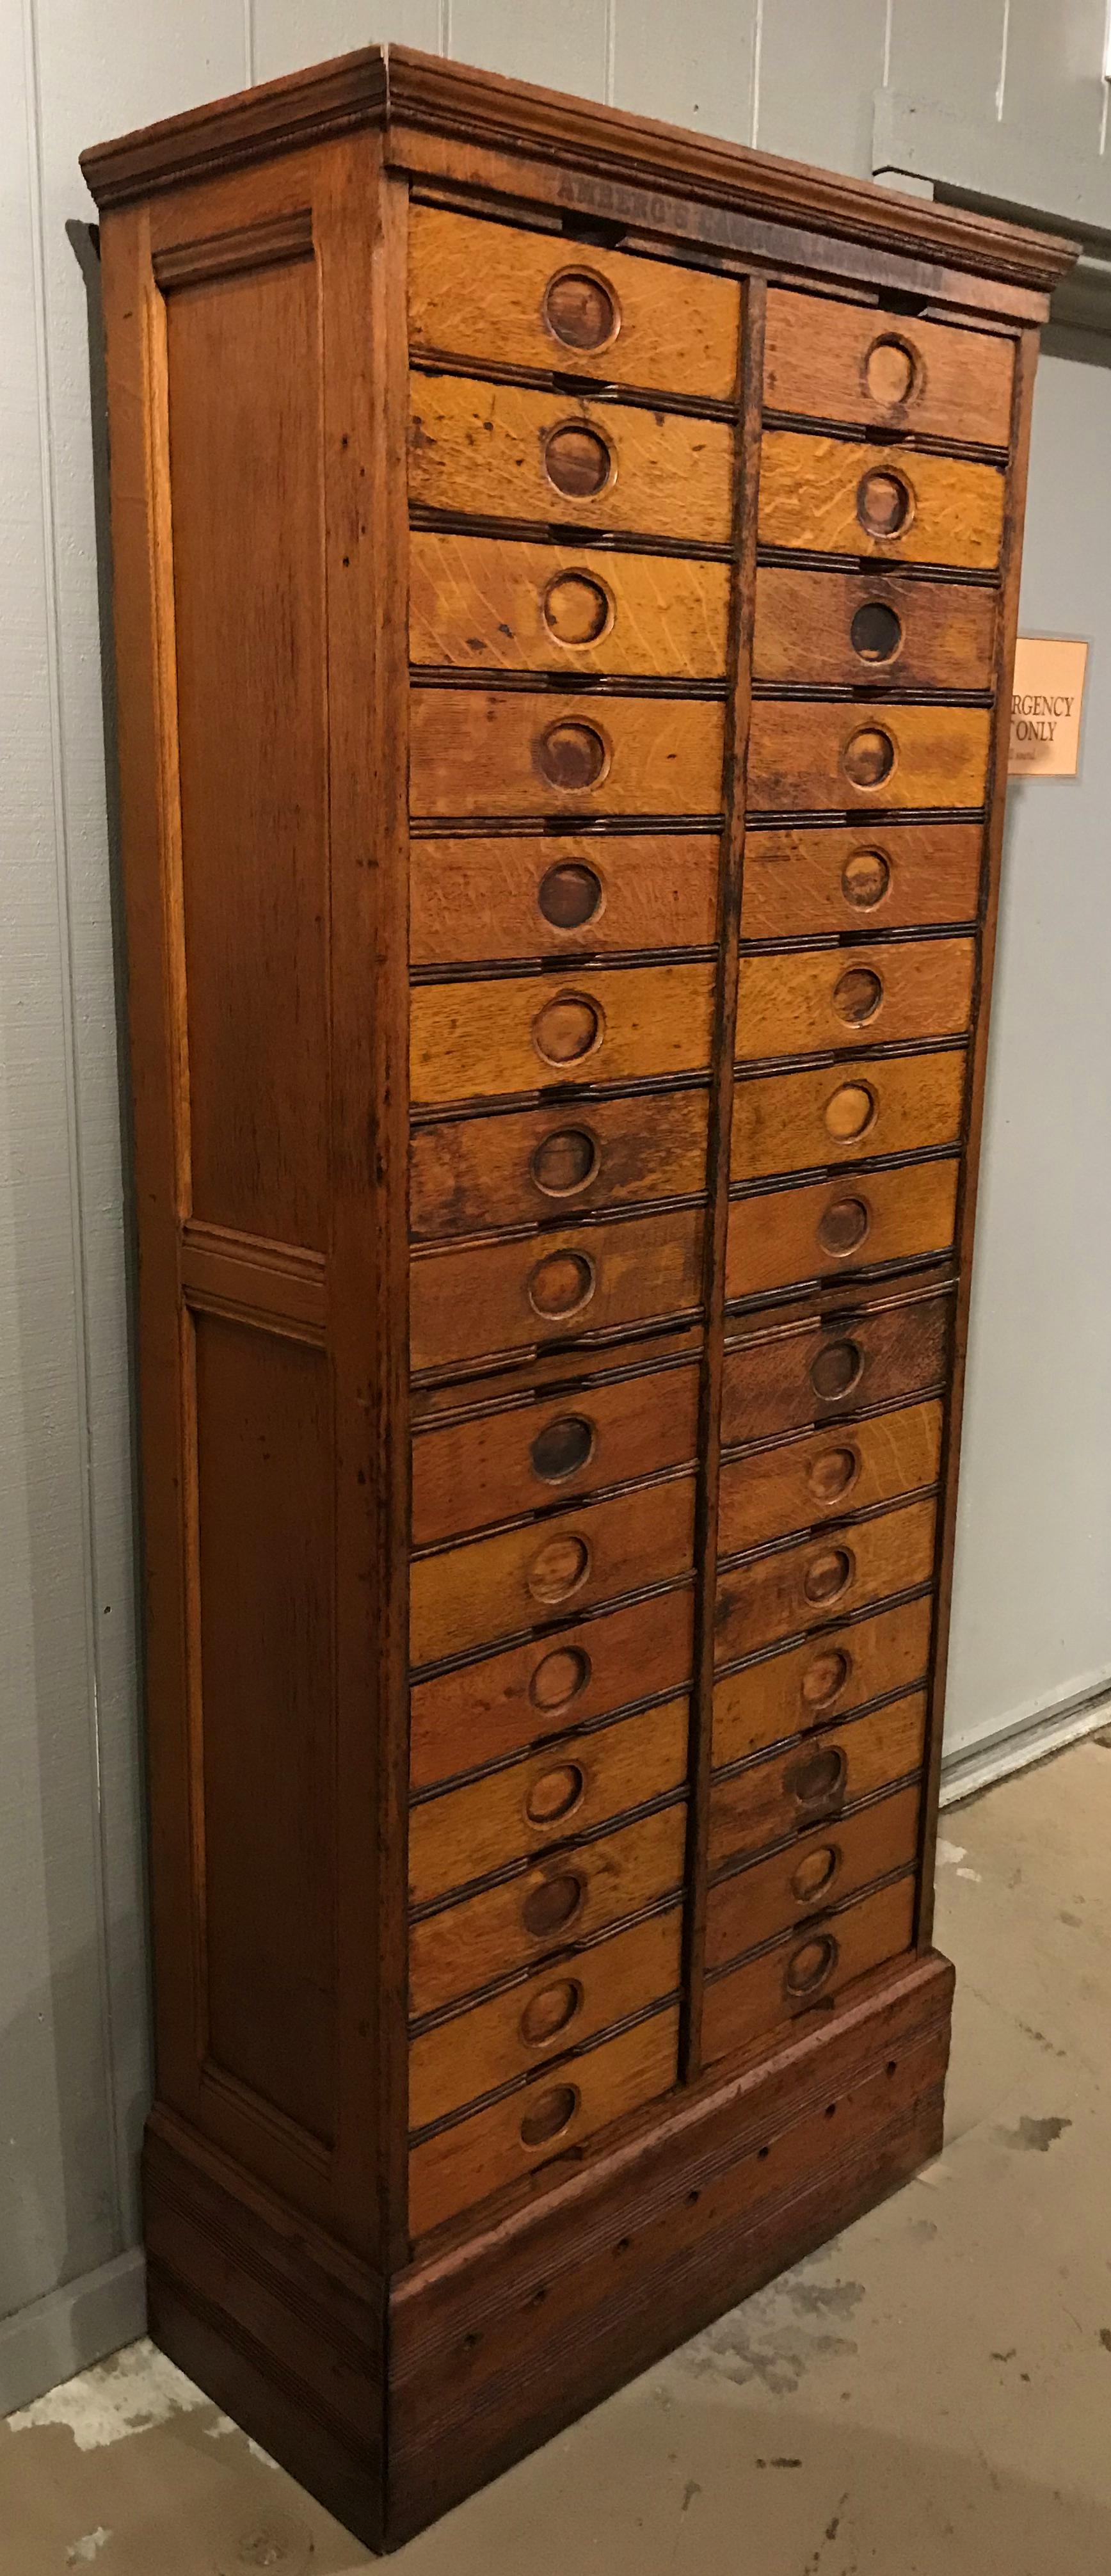 A wonderful thirty drawer cabinet in oak labeled on the top front “Amberg’s Cabinet Letter File” with interior labels which read “Amberg’s Imperial Letter File” by the Amberg Letter & Index Co, London, New York, Chicago,” originally patented in